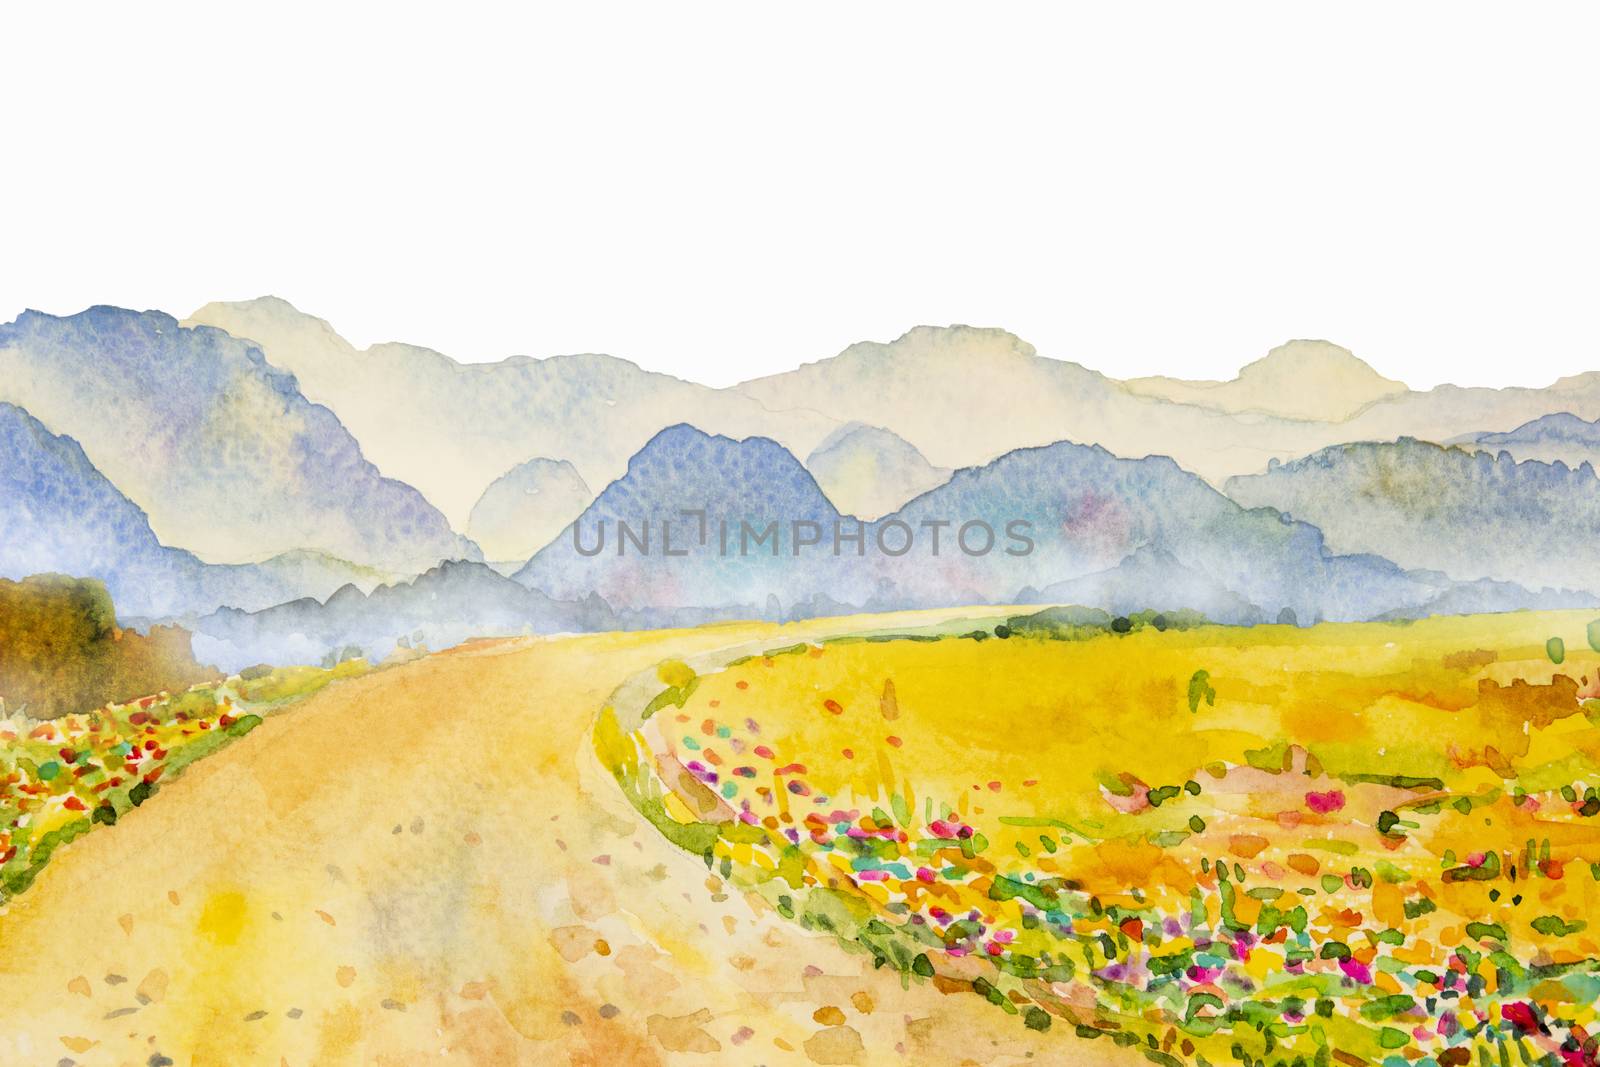 Watercolor landscape painting colorful of mountain meadow with road in the Panorama view and emotion rural society, nature beauty white background. Hand painted semi abstract illustration.